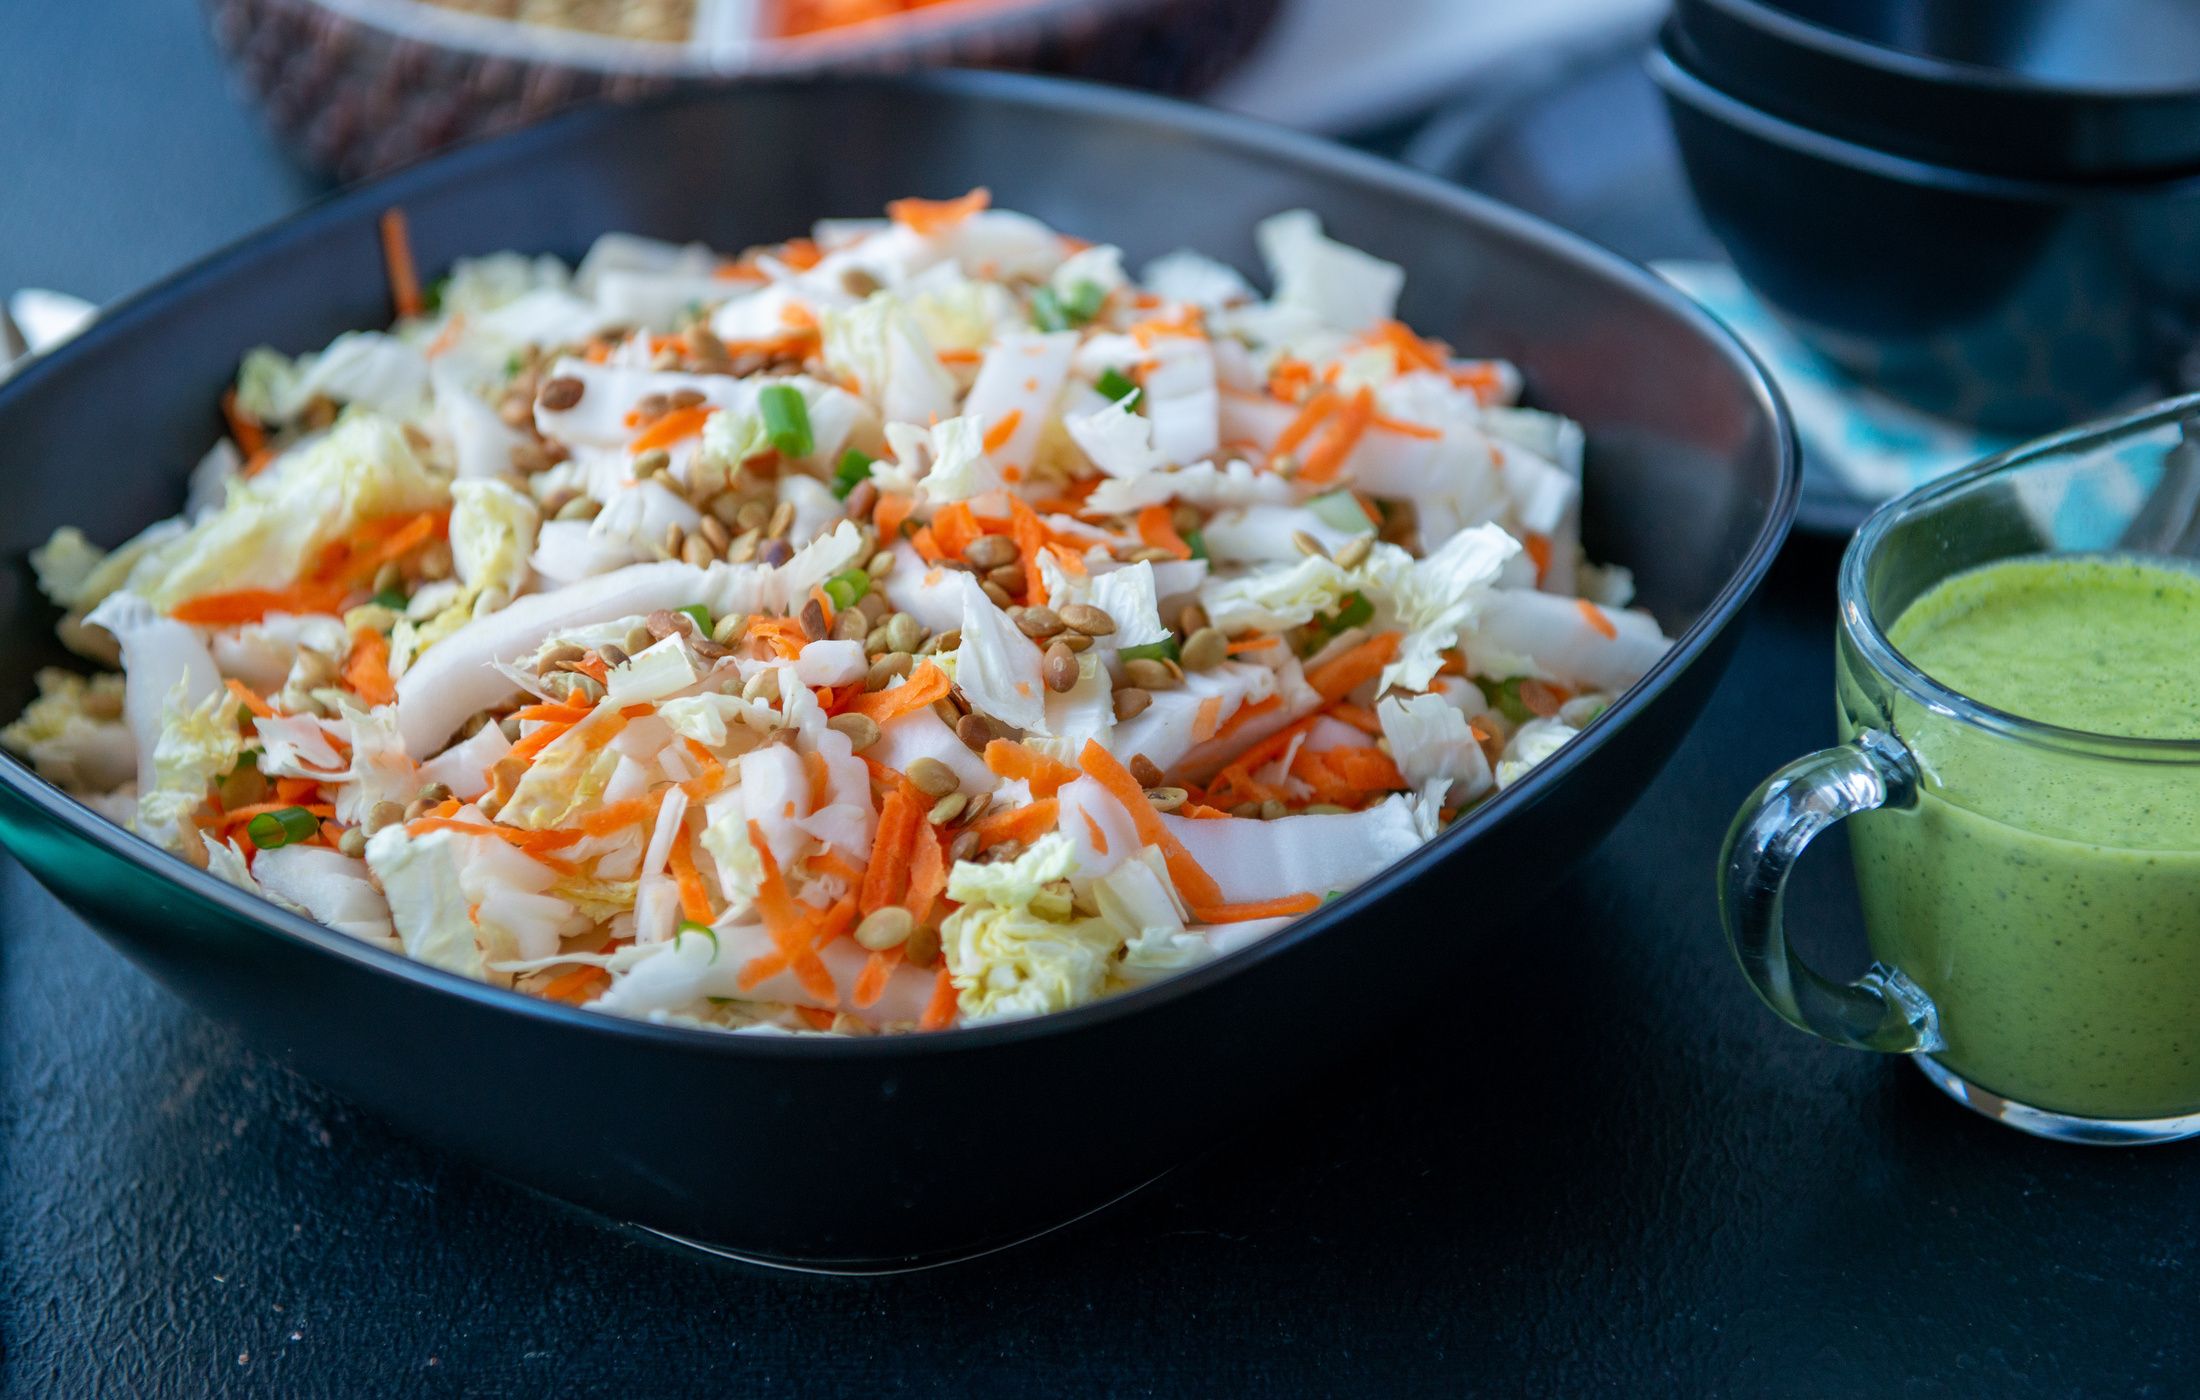 Napa Cabbage Salad with Ginger-Cilantro Dressing